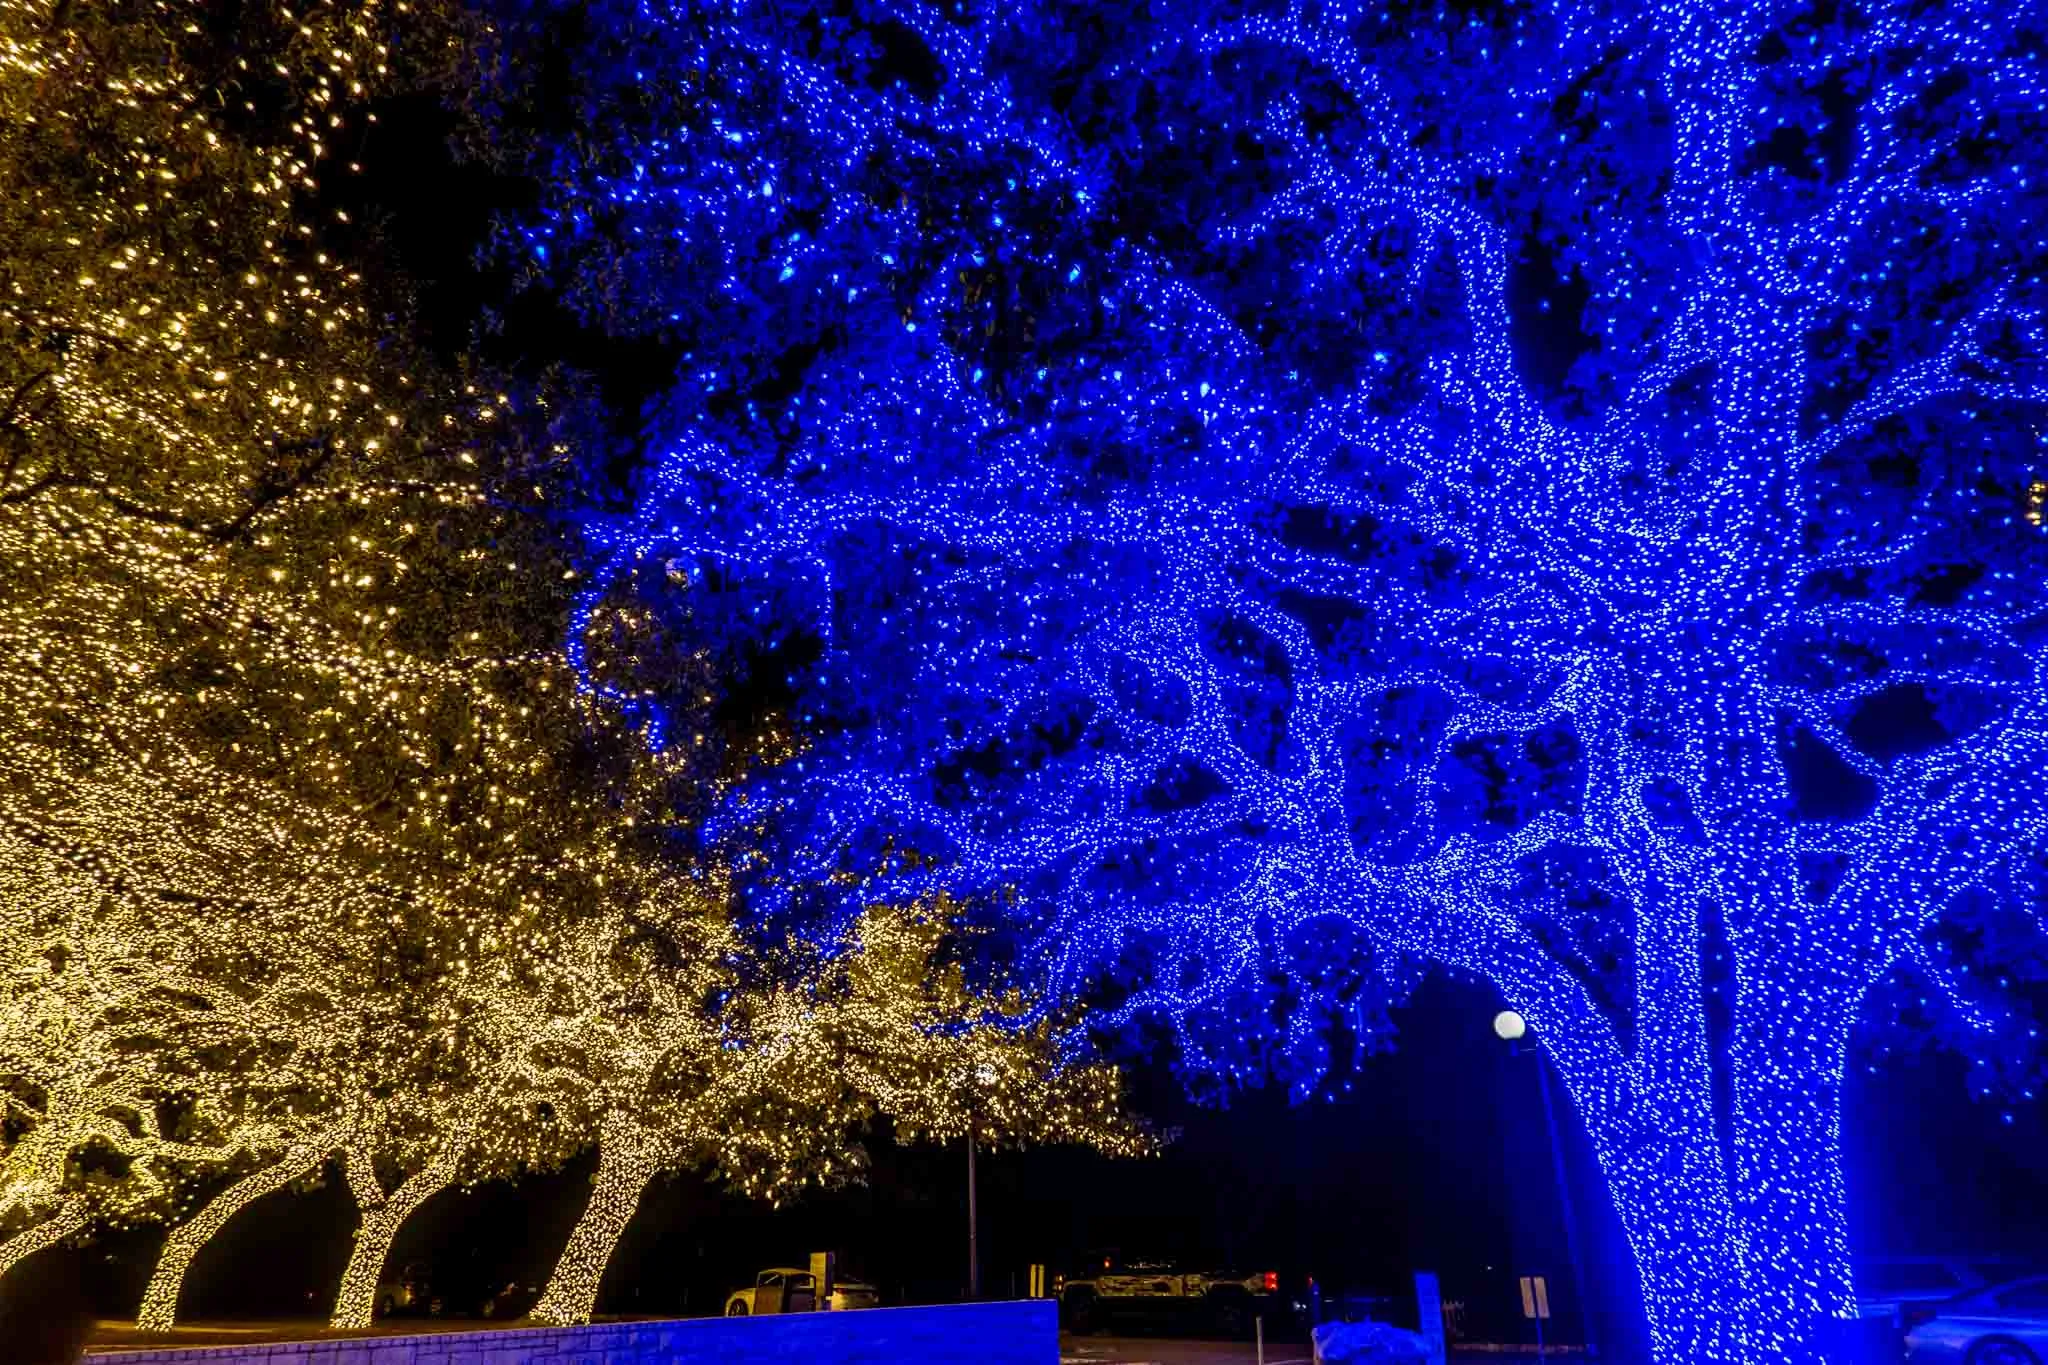 Trees covered in white and blue Christmas lights shining brightly